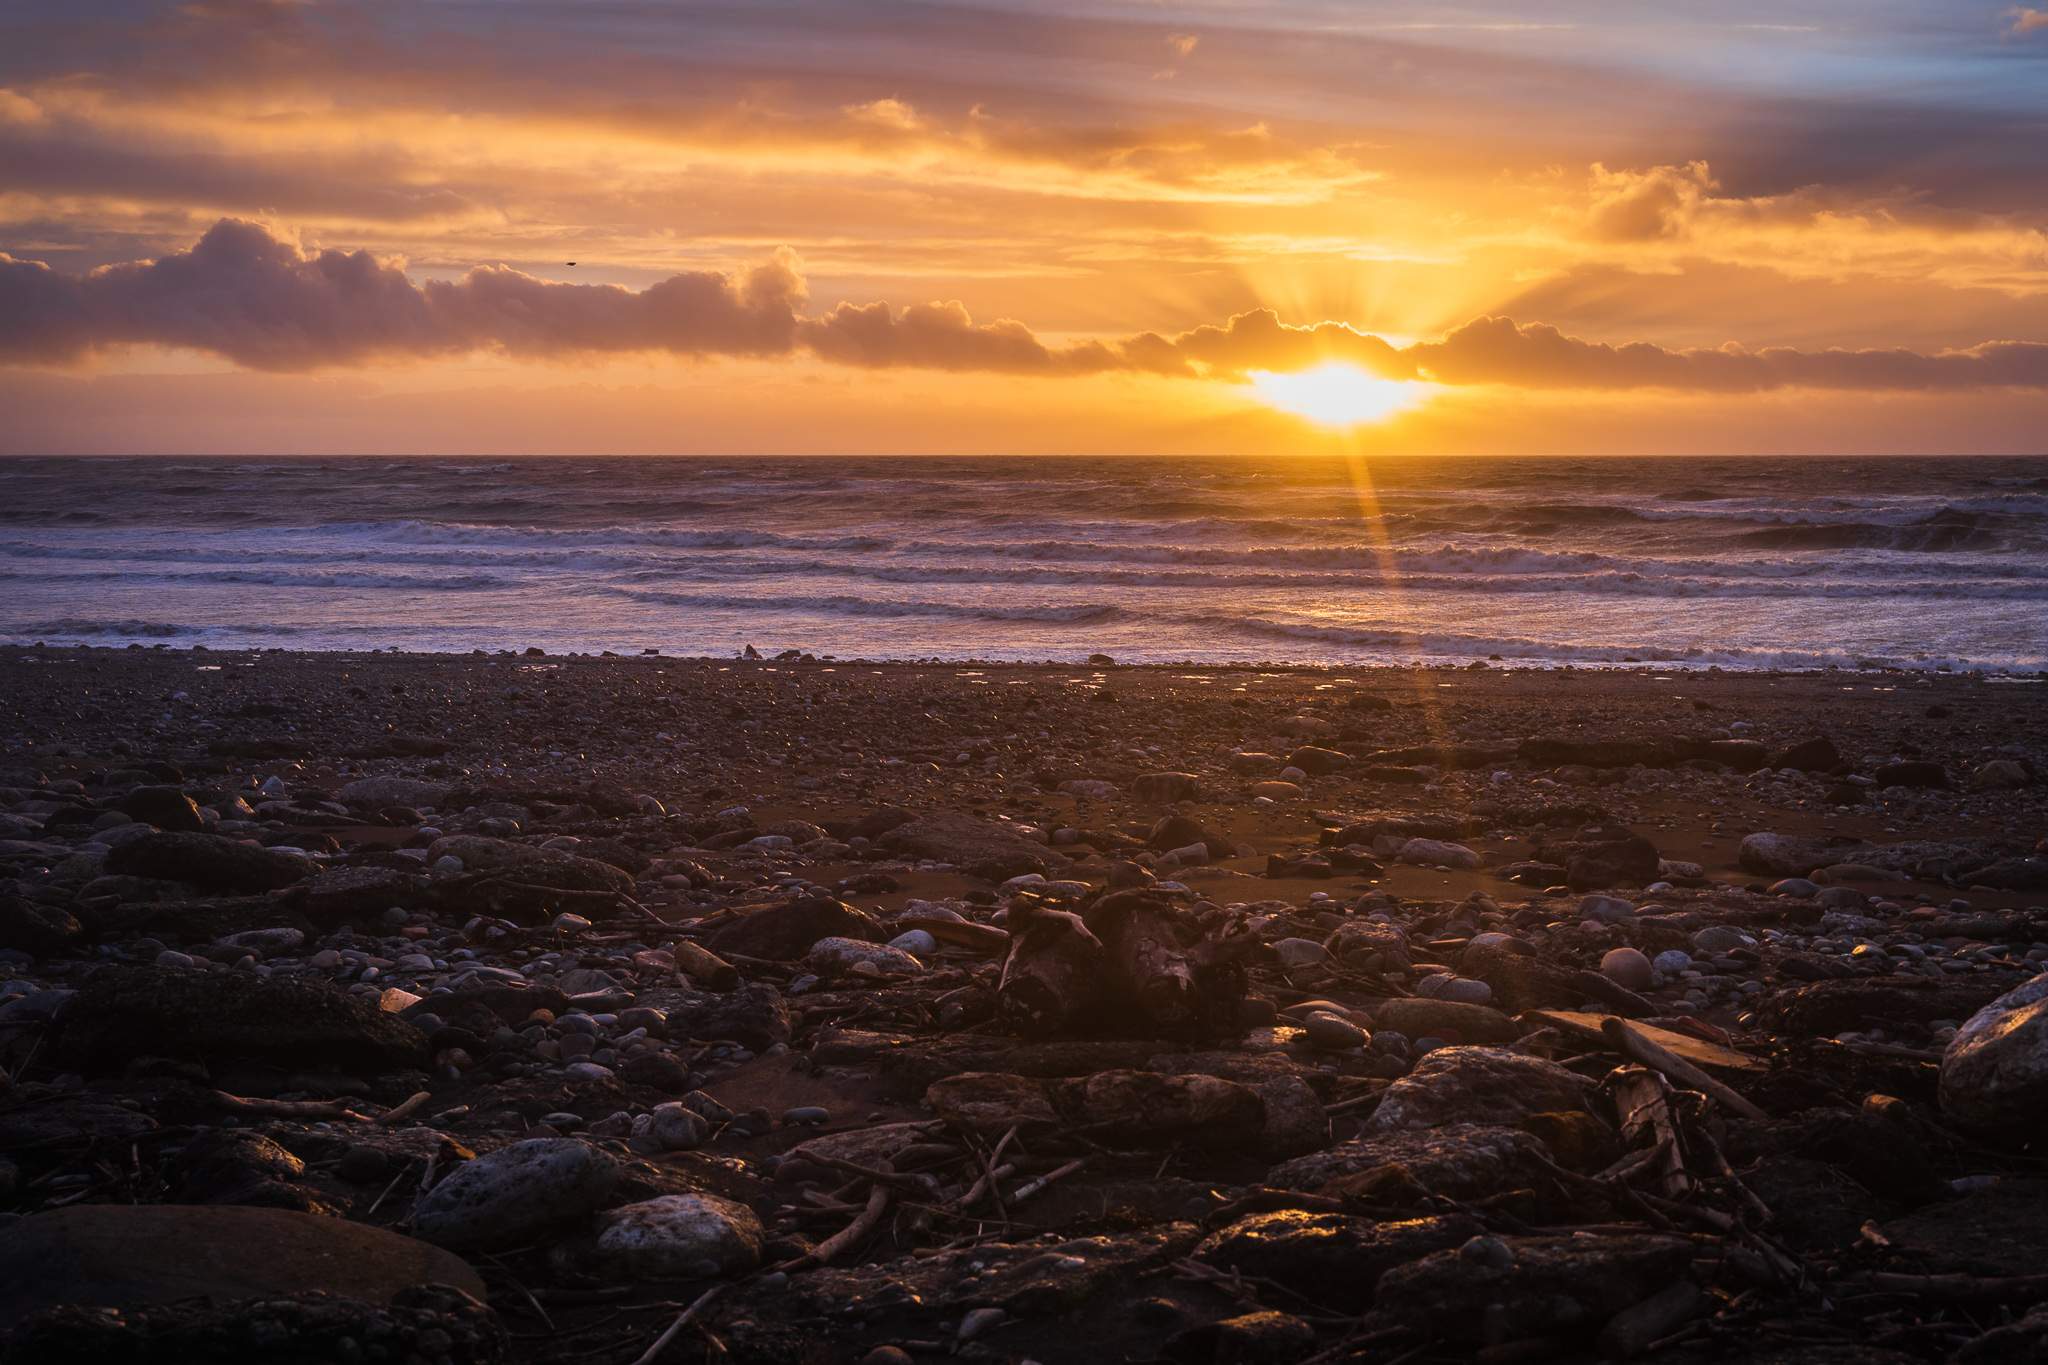 Sunset view from Workington shore, Allerdale borough of Cumbria, England, UK. Captured with Sony A7III, Sigma 24-70mm F2.8 Art at 27mm, ISO 100, 1/60sec at f/6.7